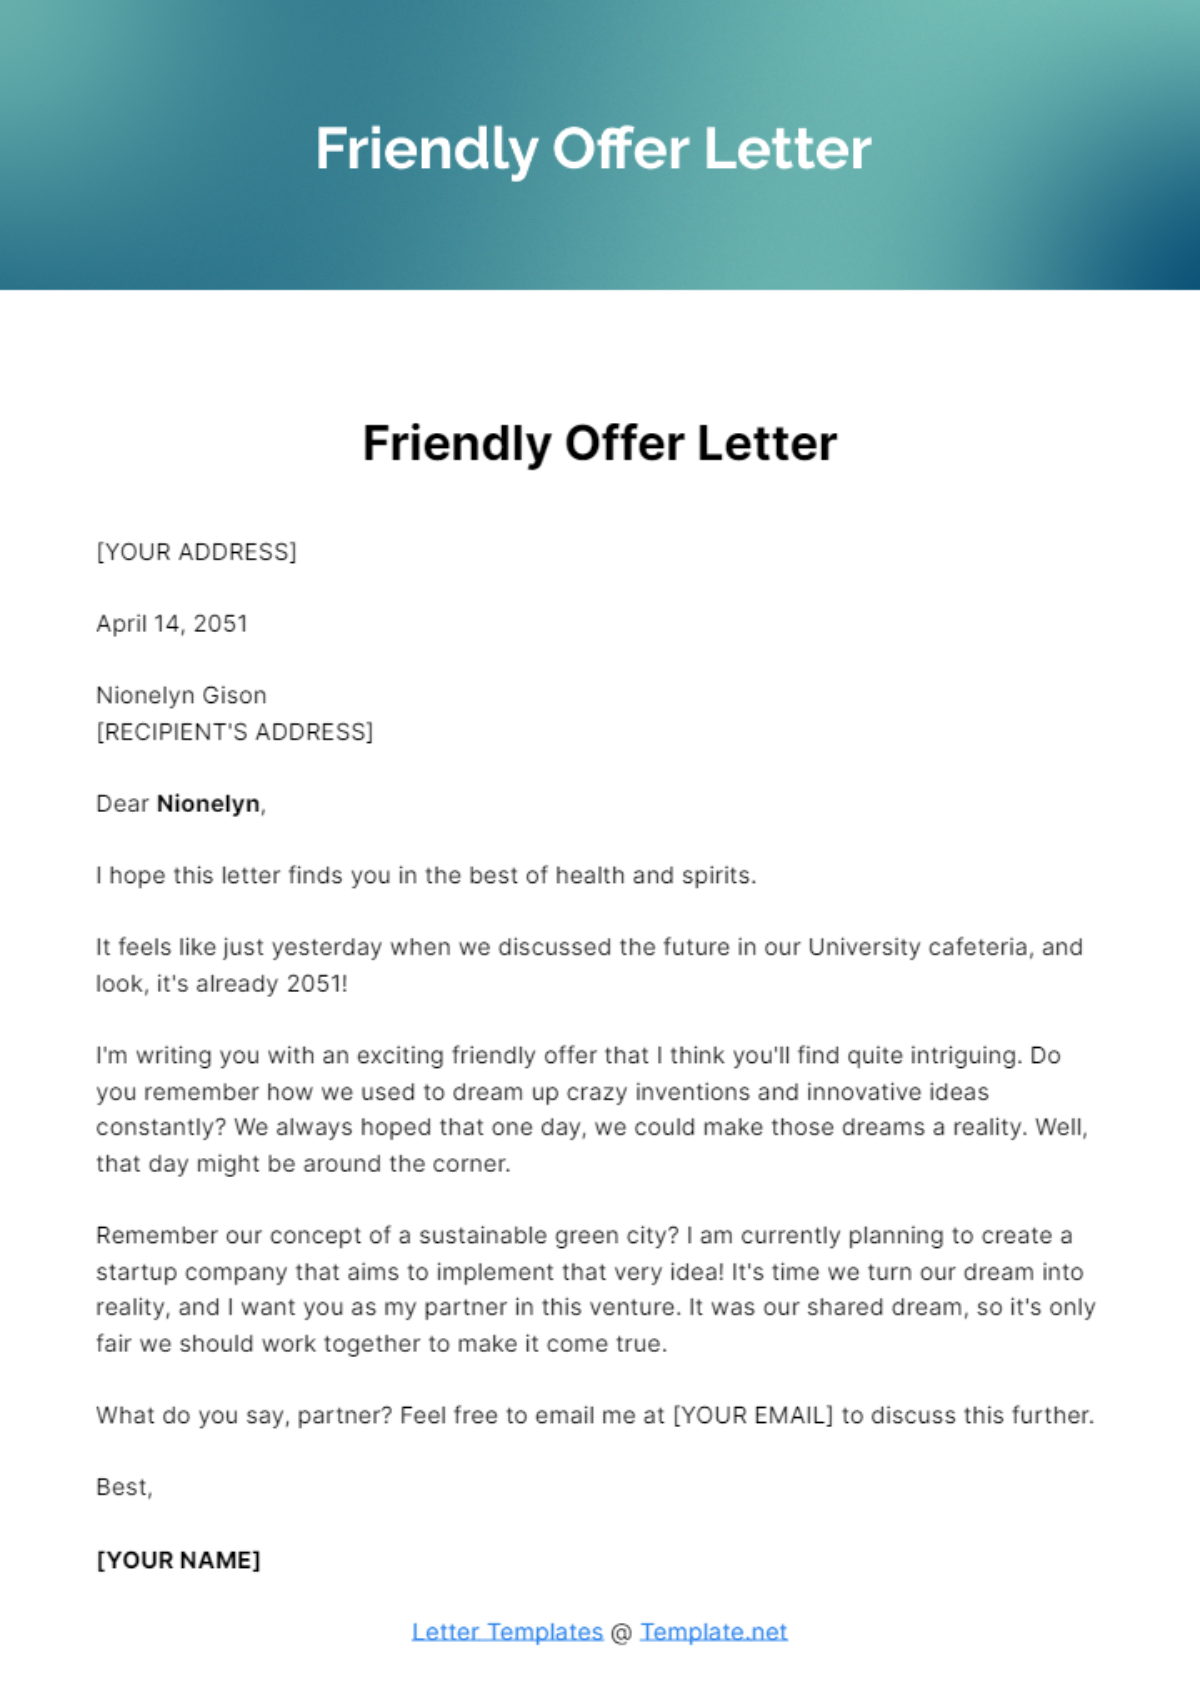 Free Friendly Offer Letter Template